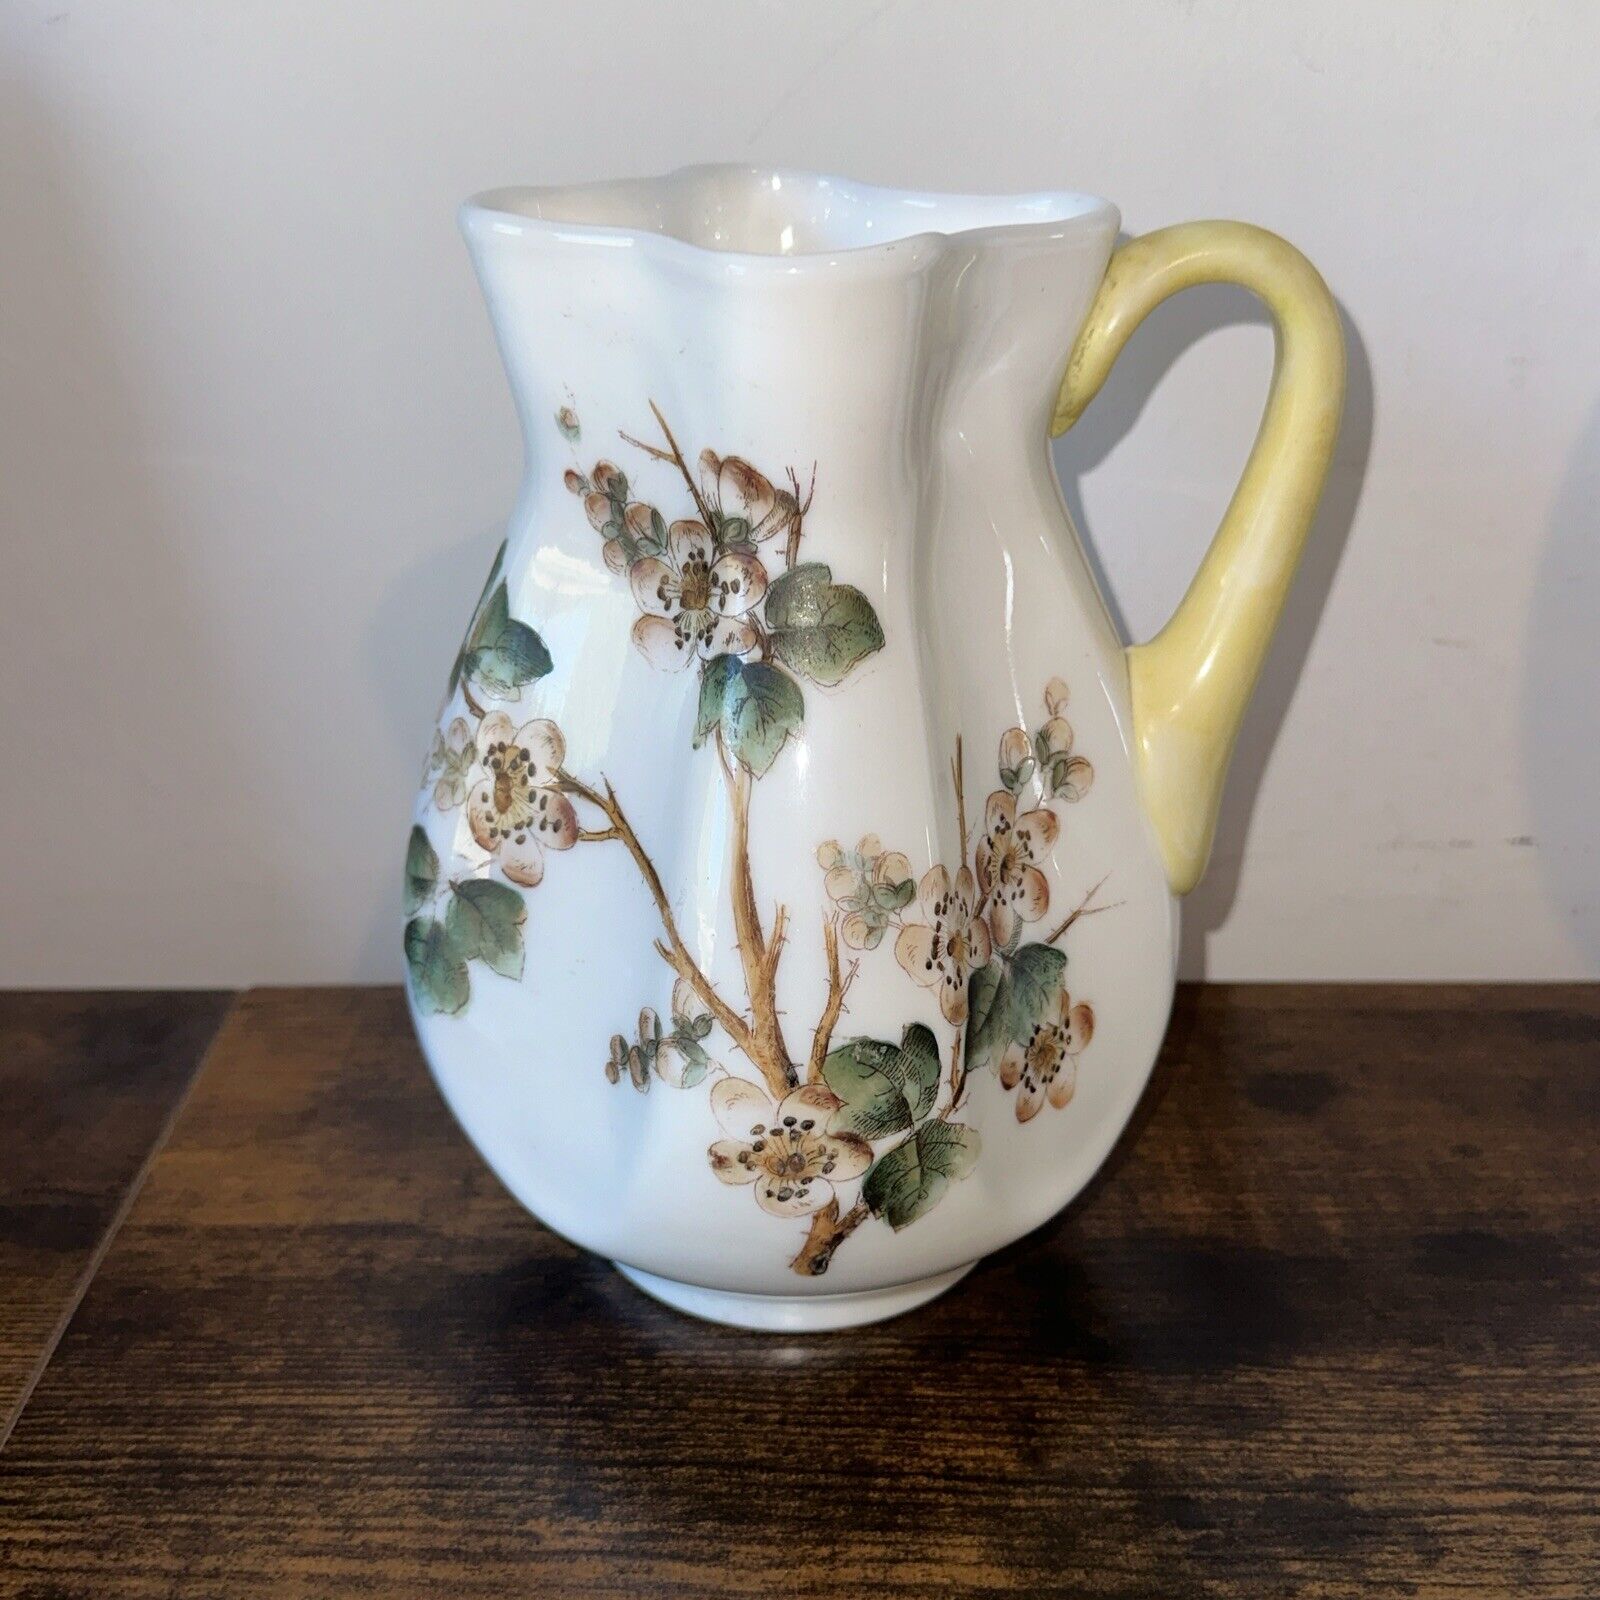 Vintage Handpainted Floral Design Fluted Pitcher With Handle